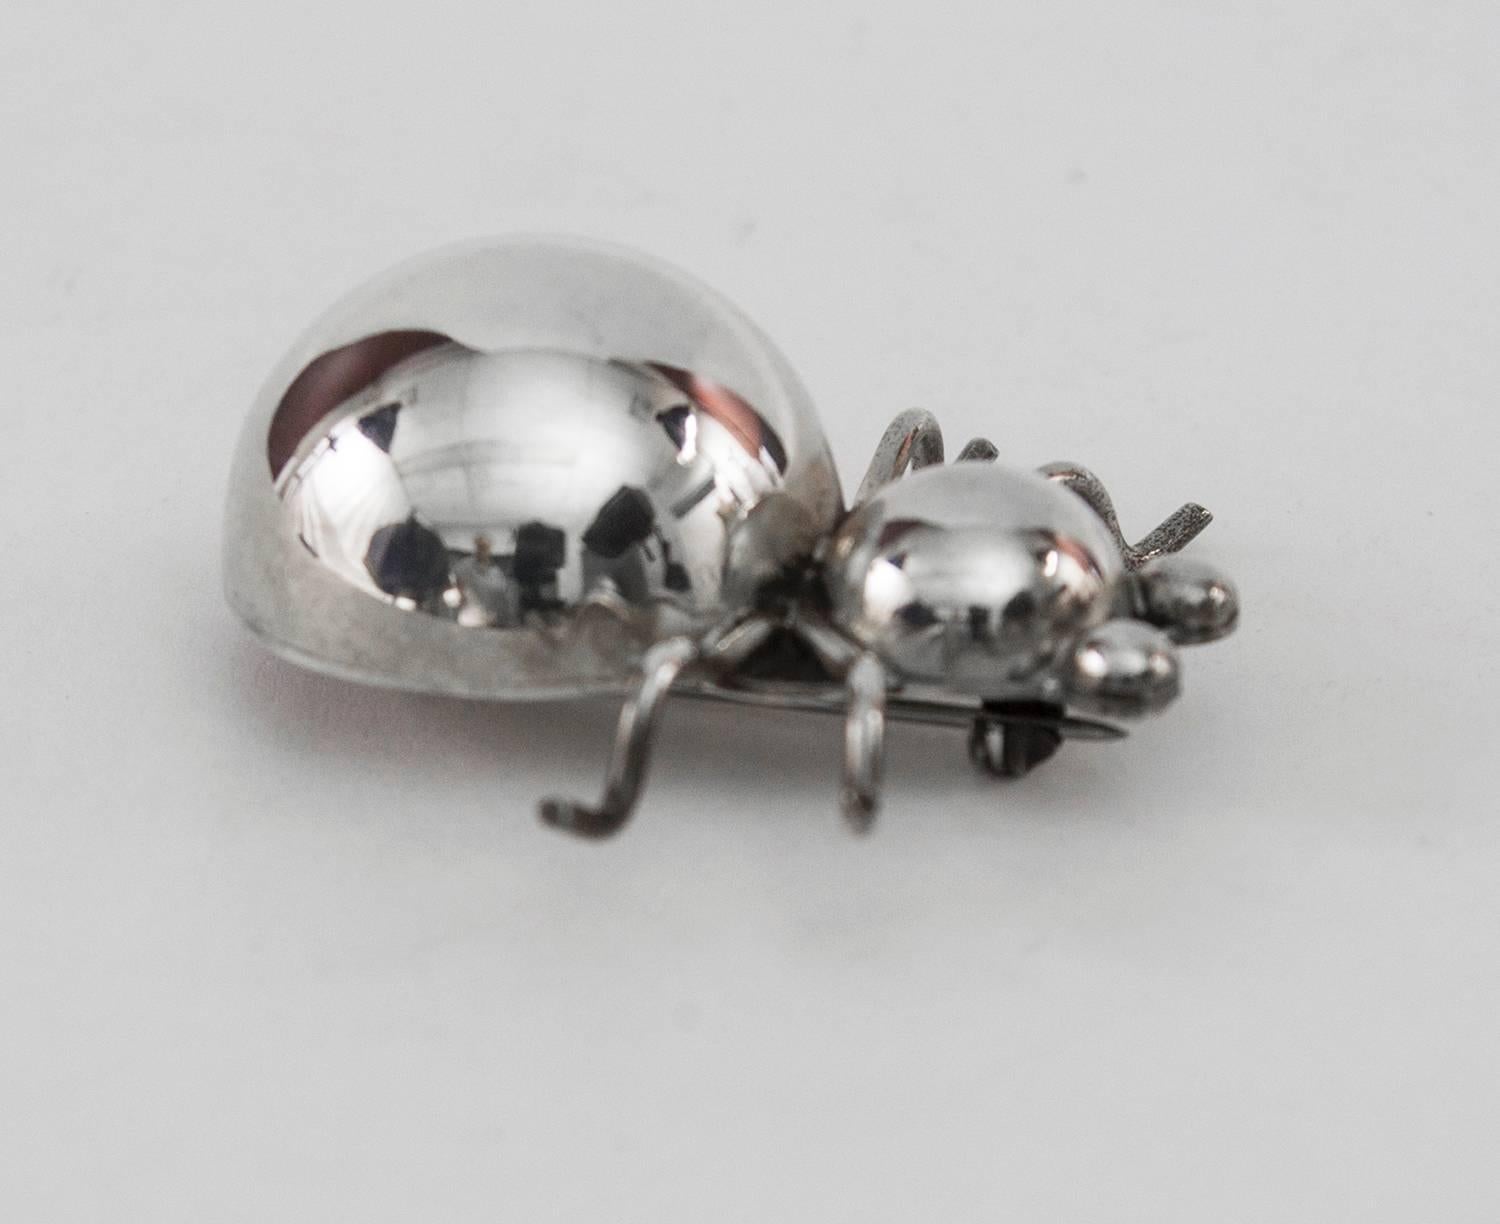 Whimsical spider pin, crafted in sterling silver; featuring four arched silver wire legs, bulbous torso and head and protuberant eyes. Marked: MEXICO STERLING 925. Approx. size:  1.5” long. C1950s. Add a little Pizzazz and your own Unique Style to